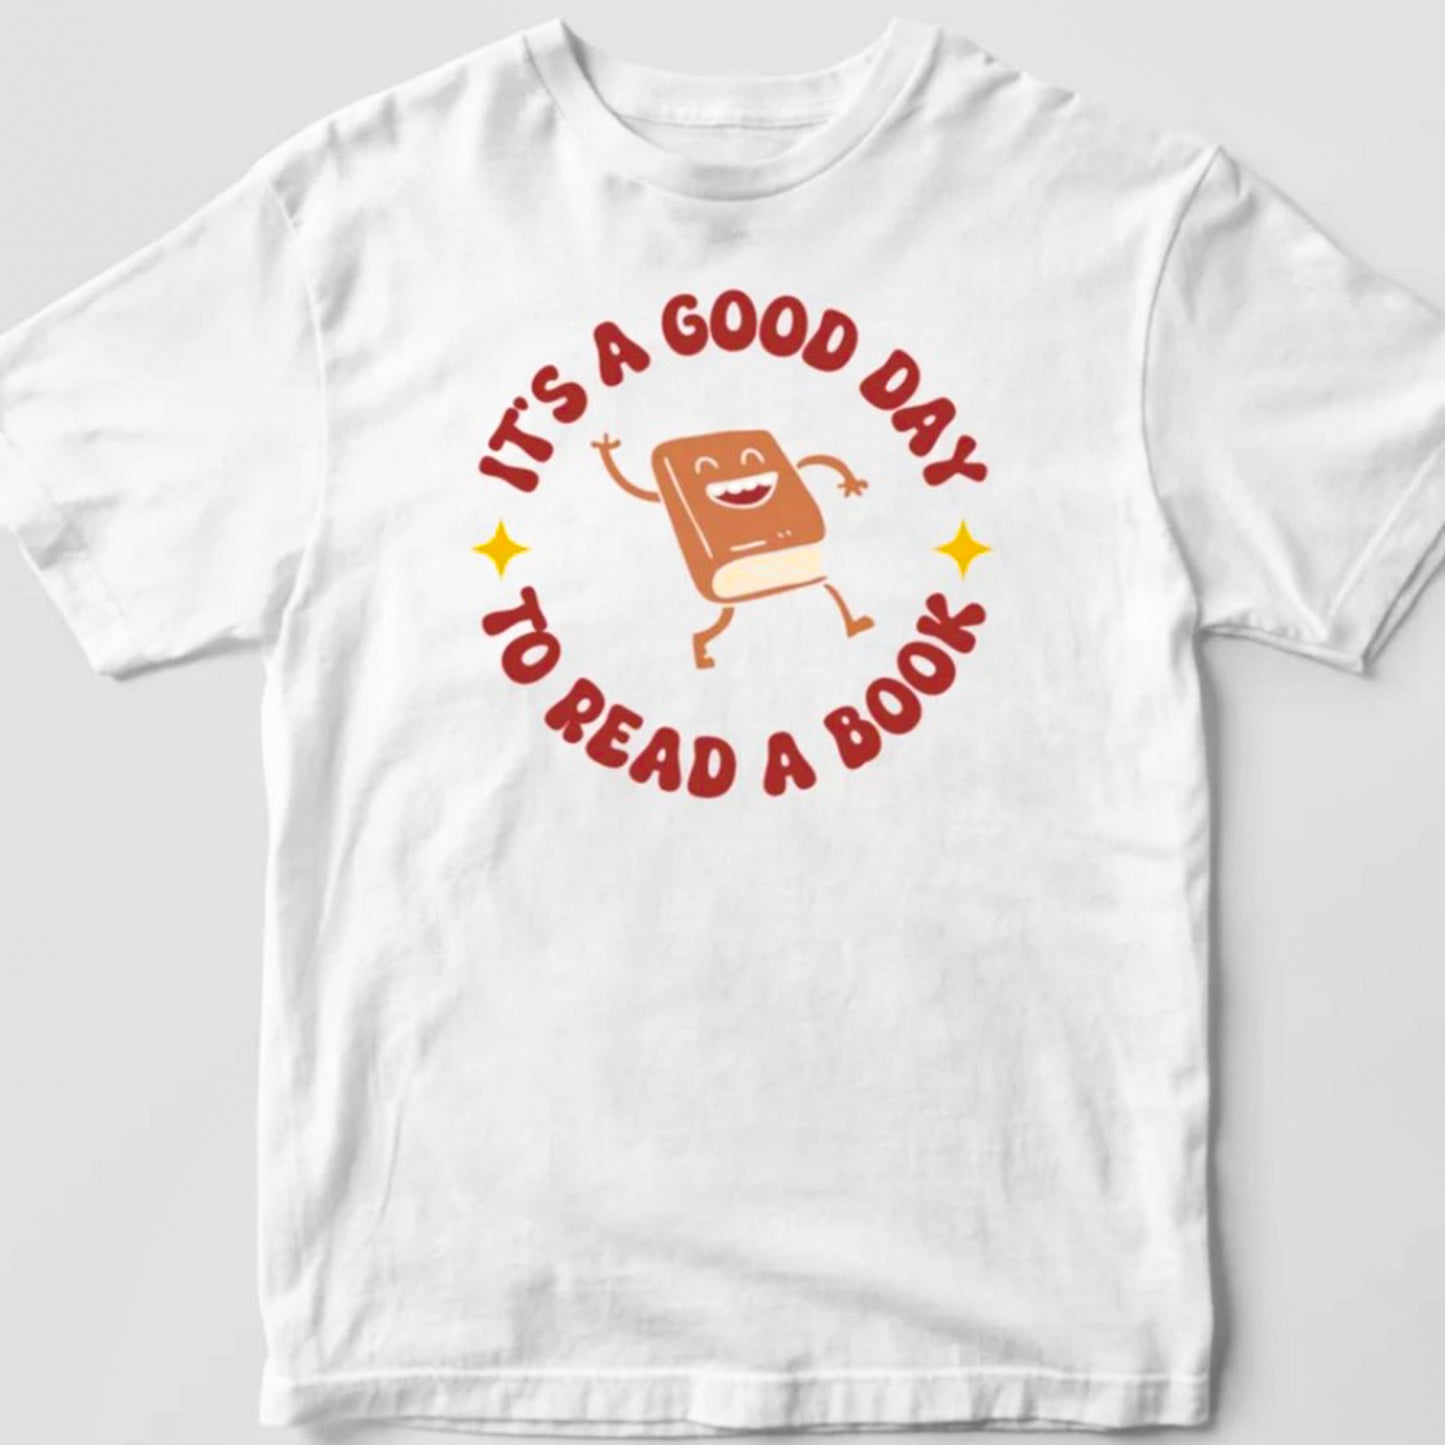 It's A Good Dady To Read A Book Tee